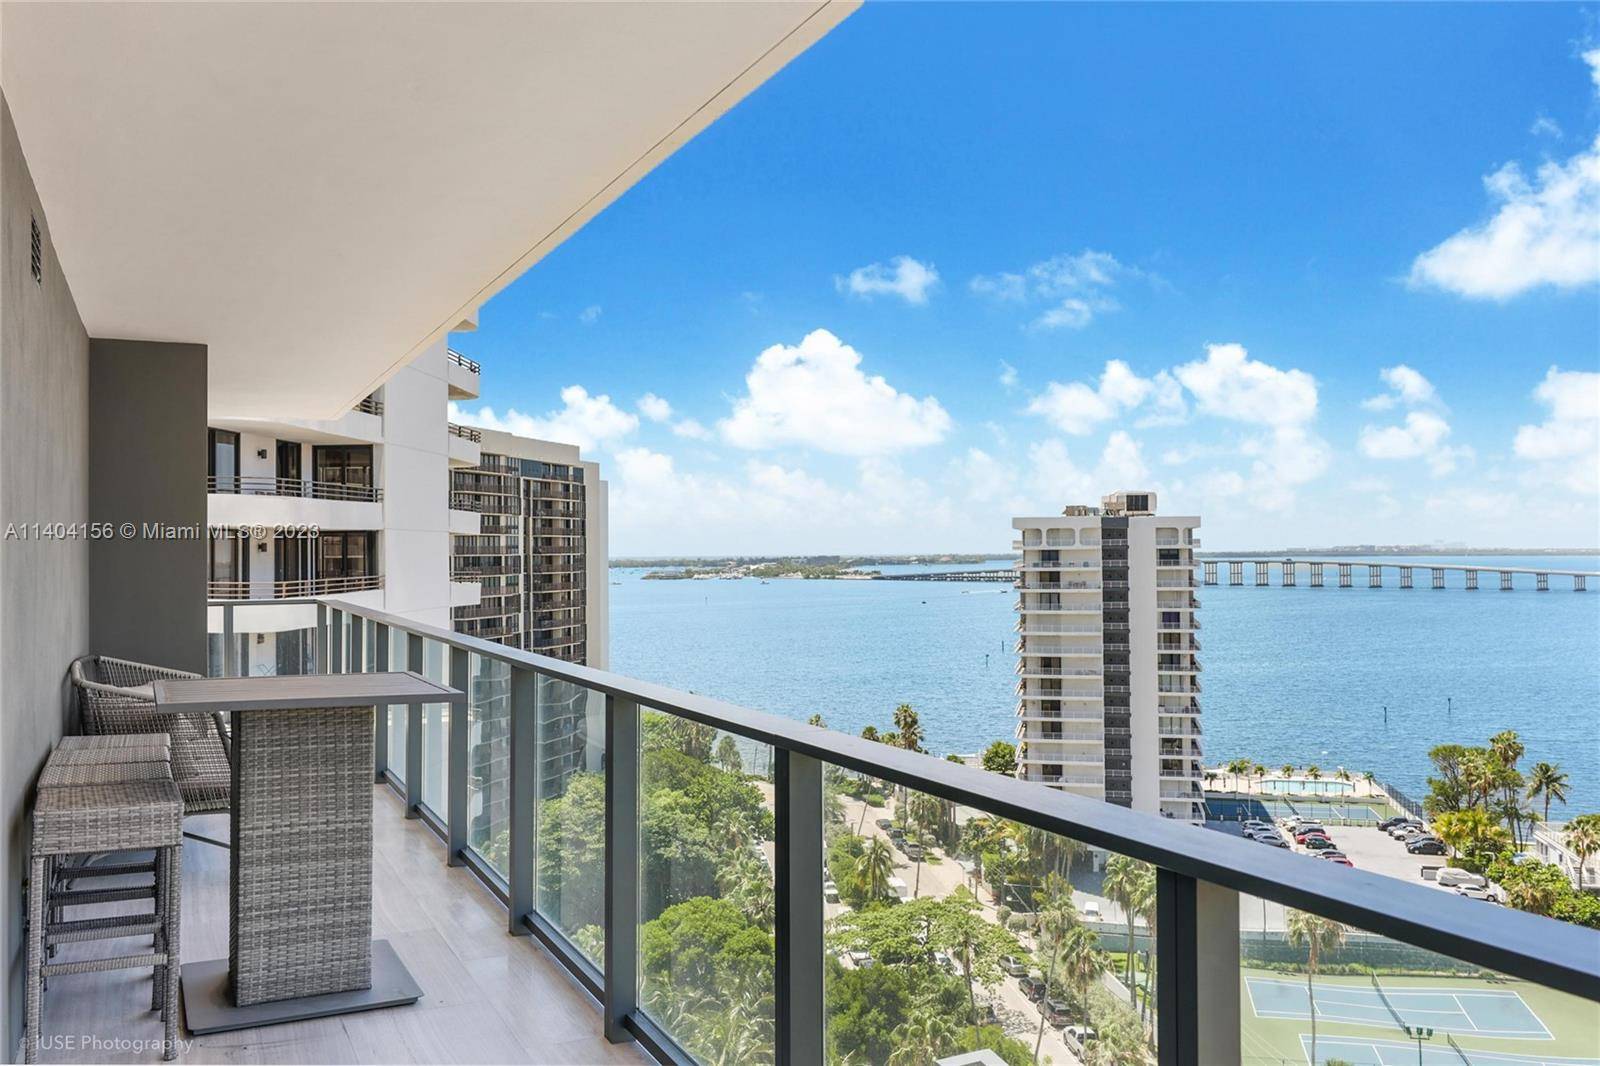 Astounding bay and city views from this luxury completely furnished corner unit 2 Bed 2.